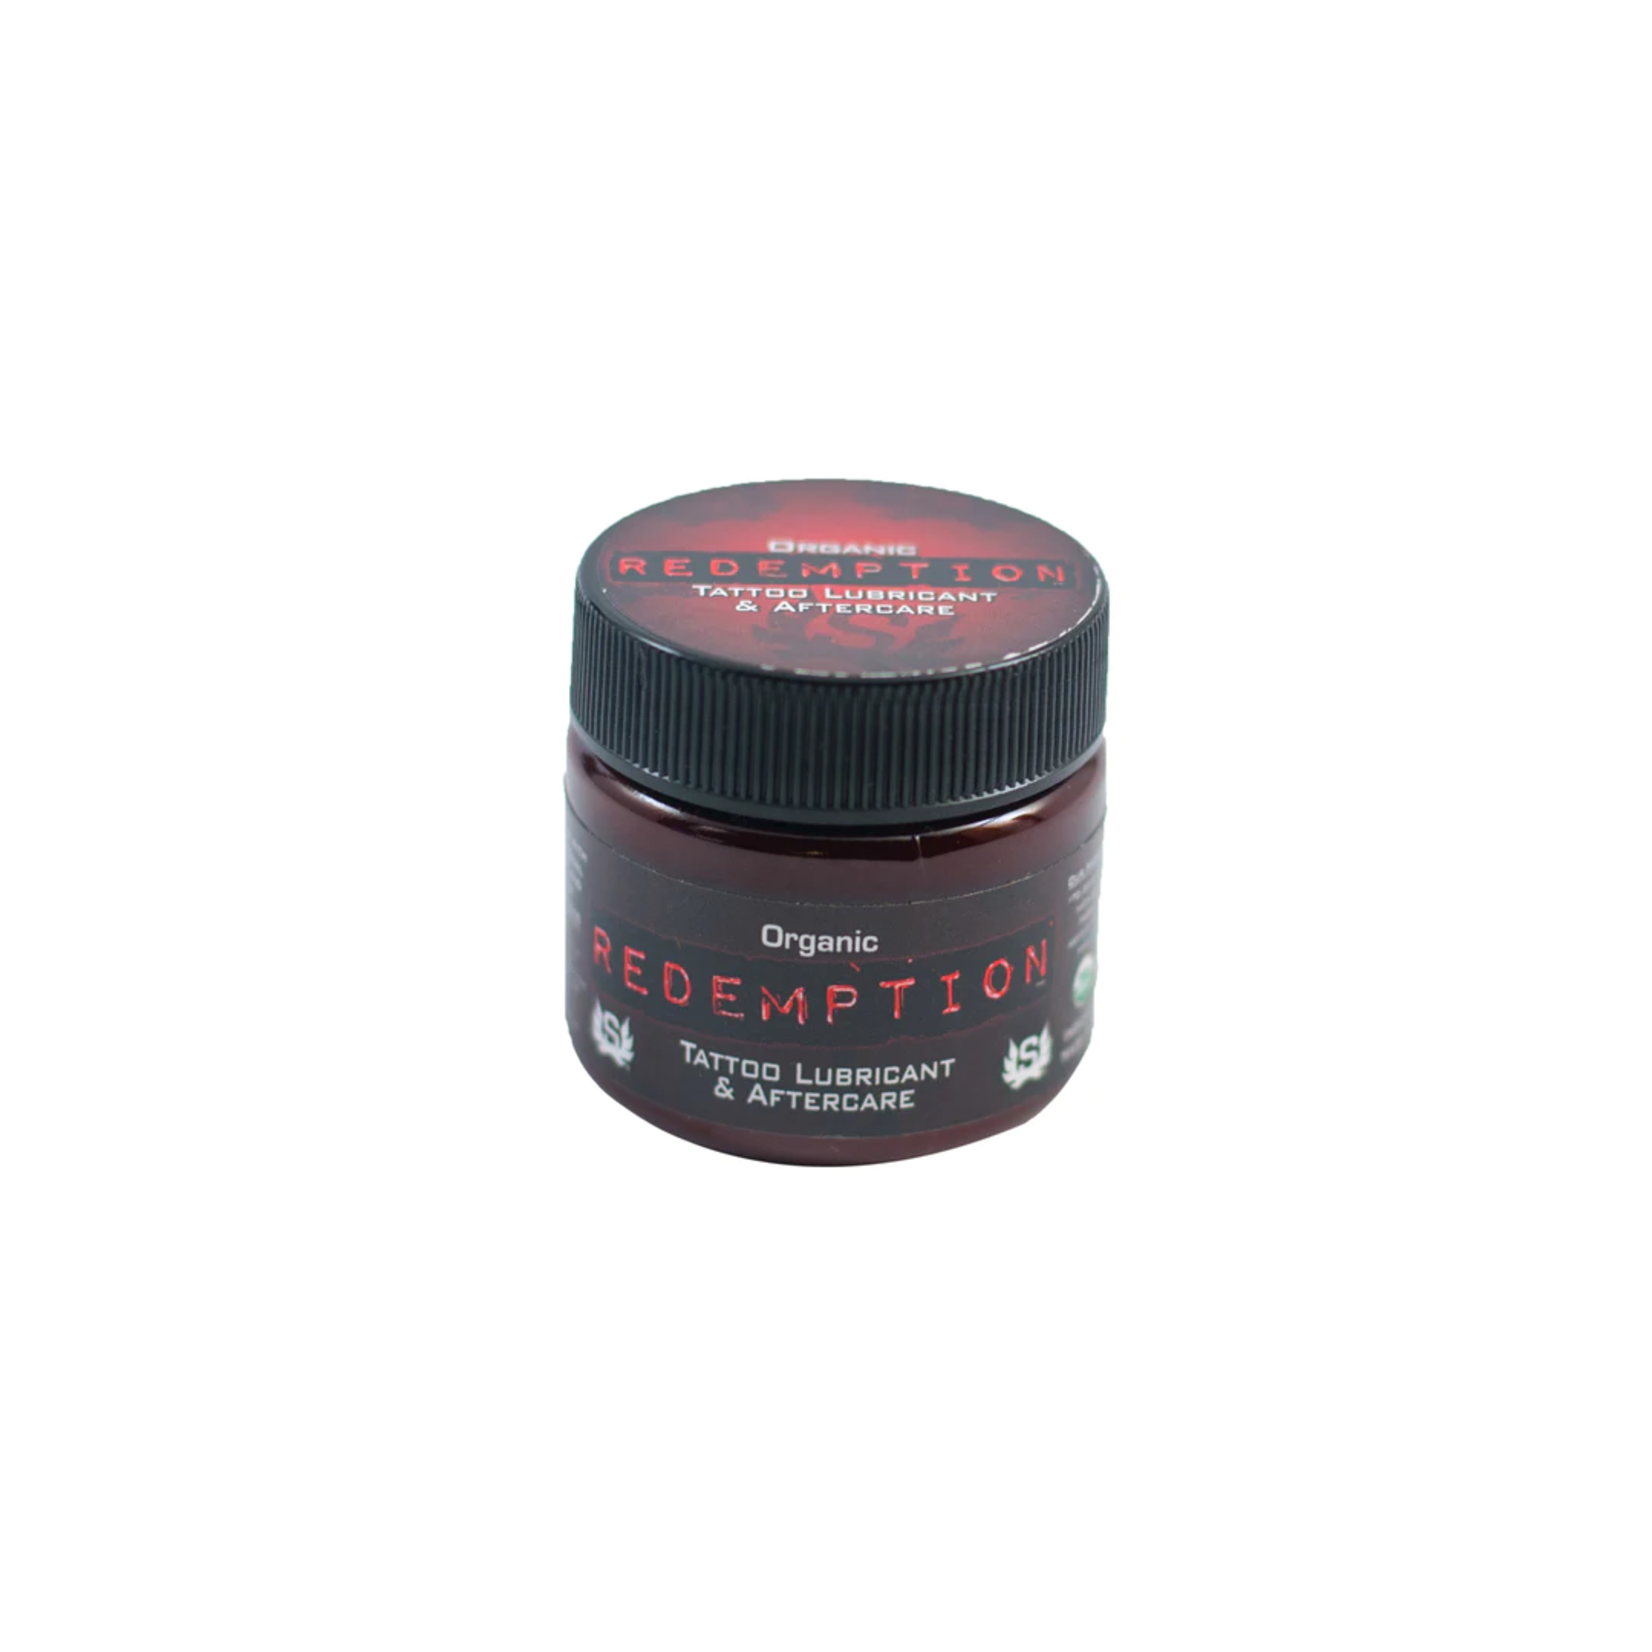 REDEMPTION TATTOO LUBRICANT & AFTERCARE - 1OZ. JAR